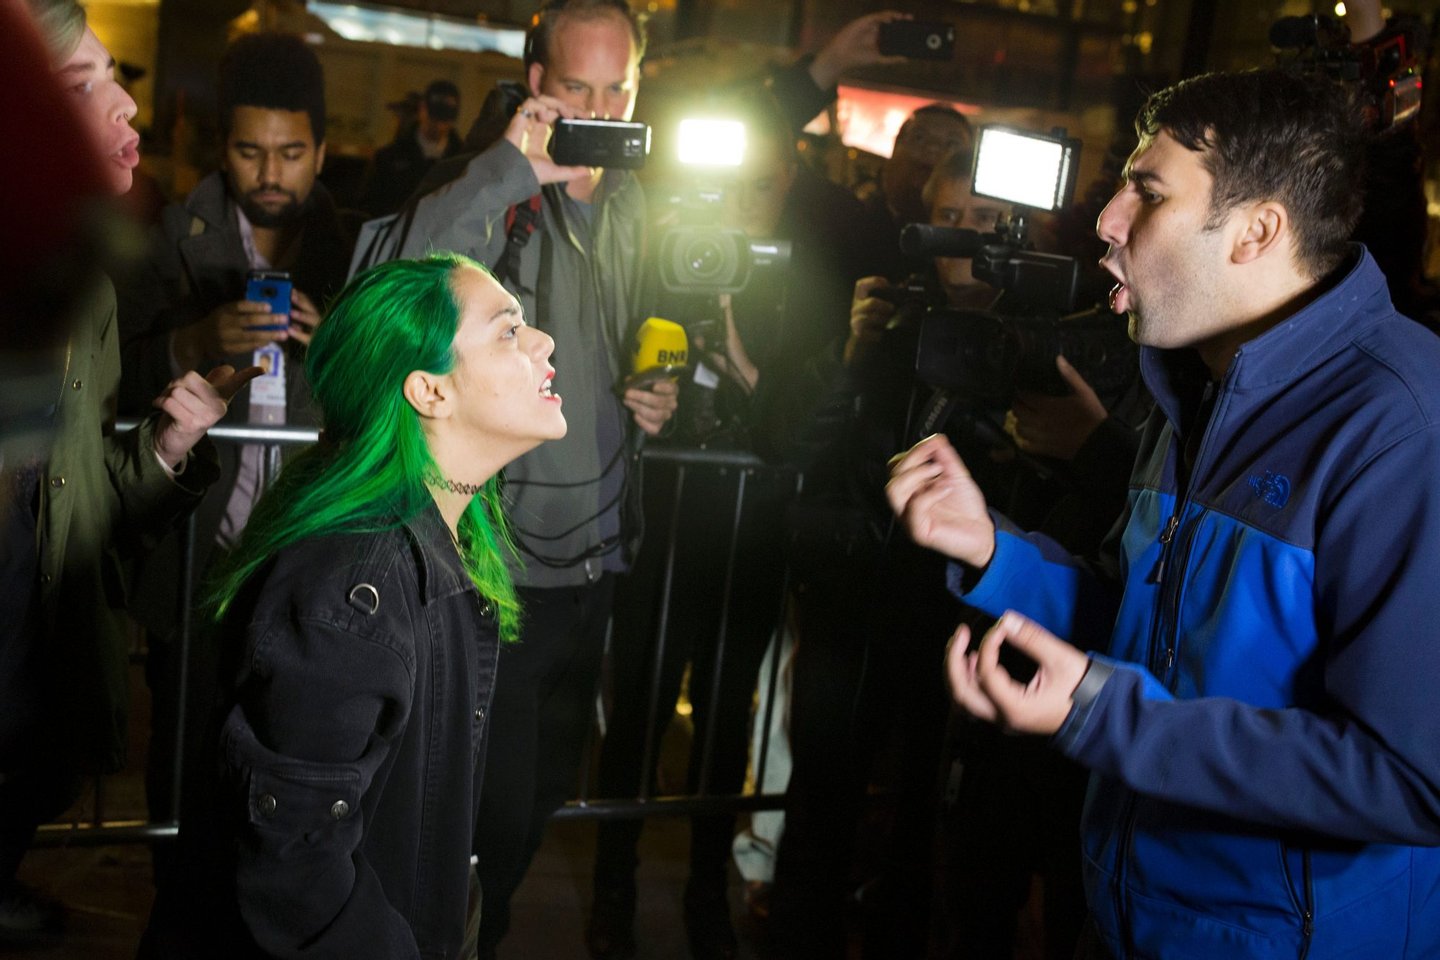 A protester argues with a supporter of Republican presidential nominee Donald Trump outside Trump Tower in New York City after midnight on election day November 9, 2016. Donald Trump stunned America and the world, riding a wave of populist resentment to defeat Hillary Clinton in the race to become the 45th president of the United States. The Republican mogul defeated his Democratic rival, plunging global markets into turmoil and casting the long-standing global political order, which hinges on Washington's leadership, into doubt. / AFP / DOMINICK REUTER (Photo credit should read DOMINICK REUTER/AFP/Getty Images)